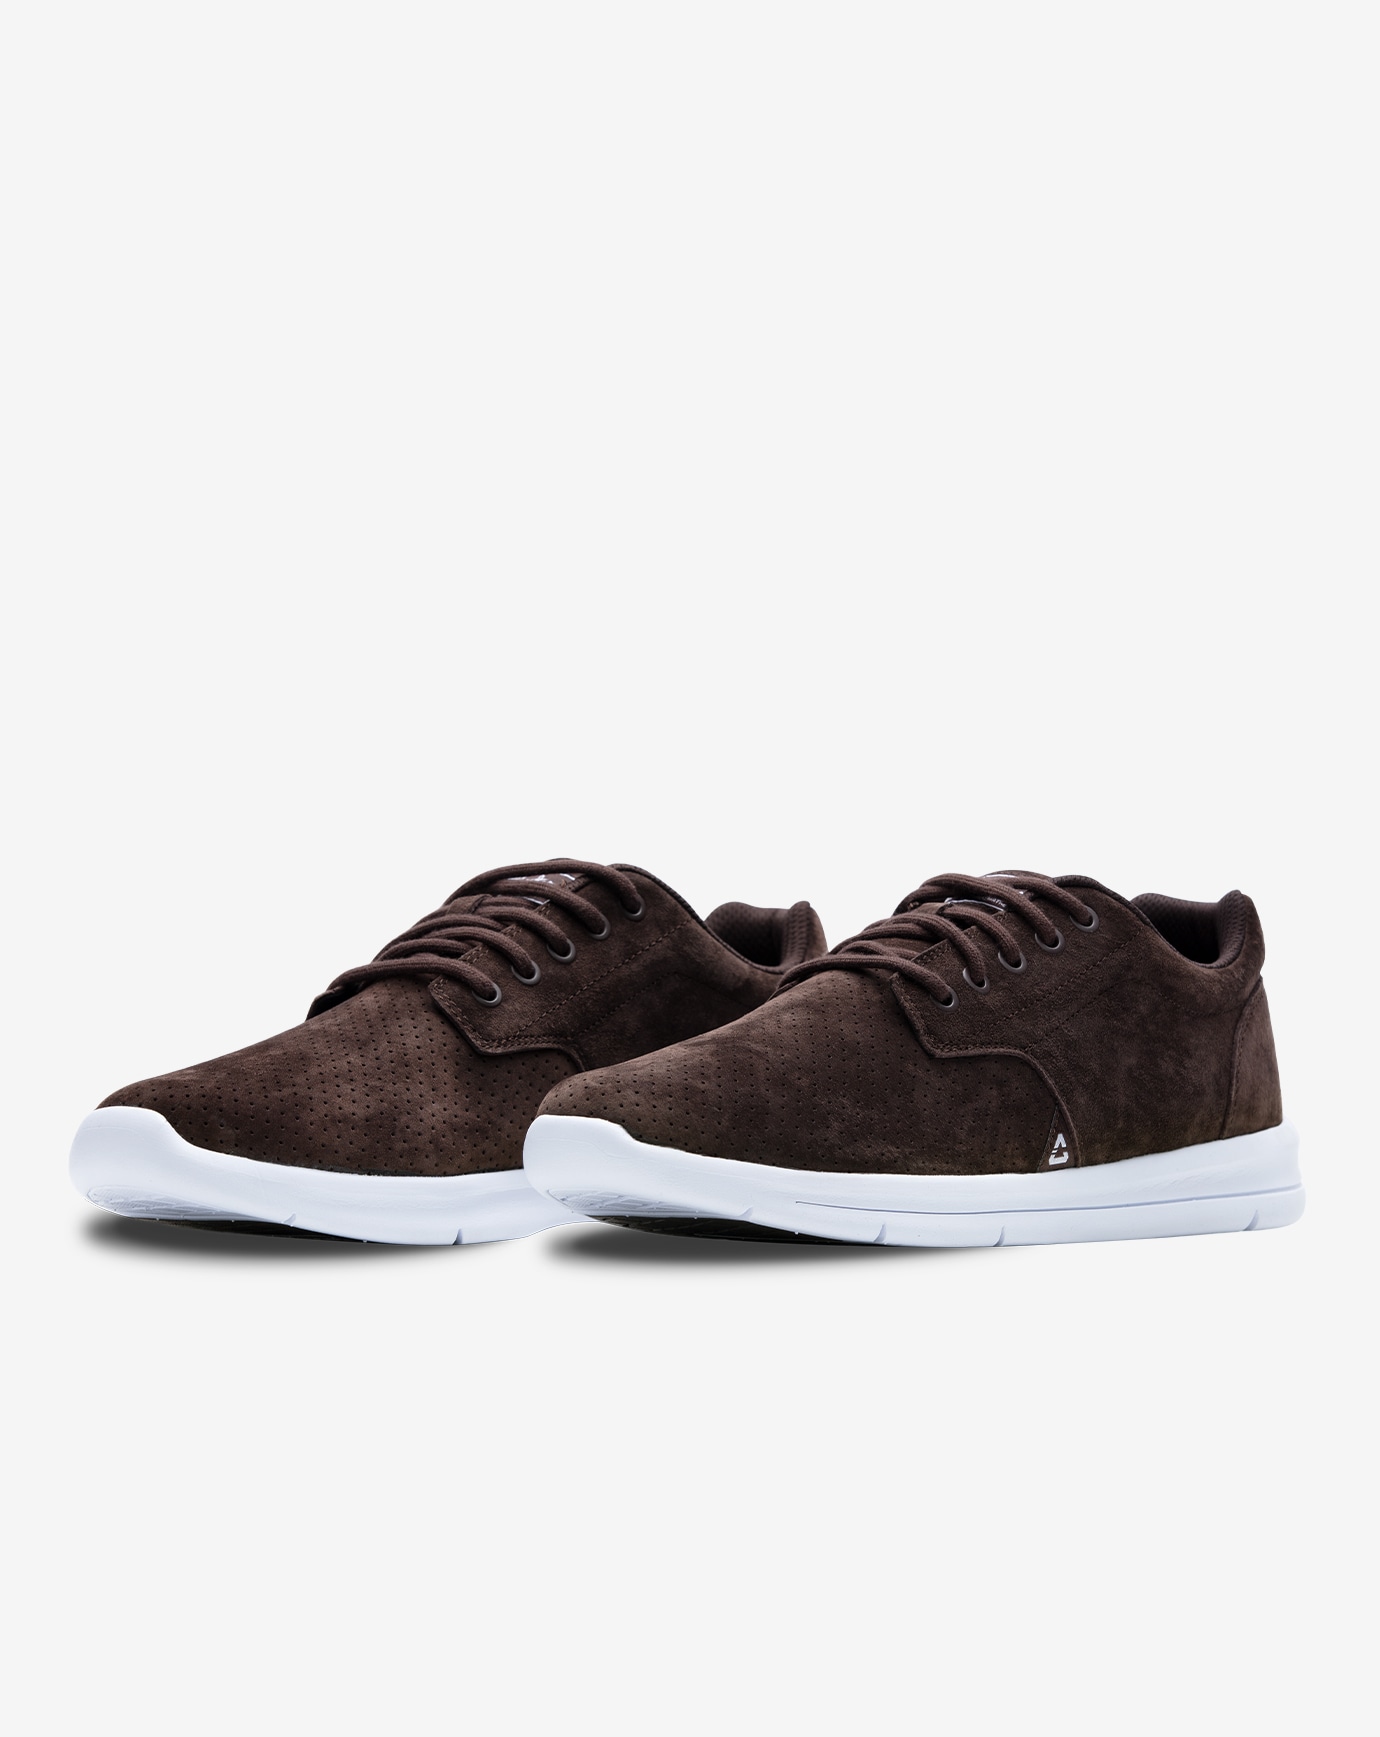 THE DAILY SUEDE SHOE Image 6